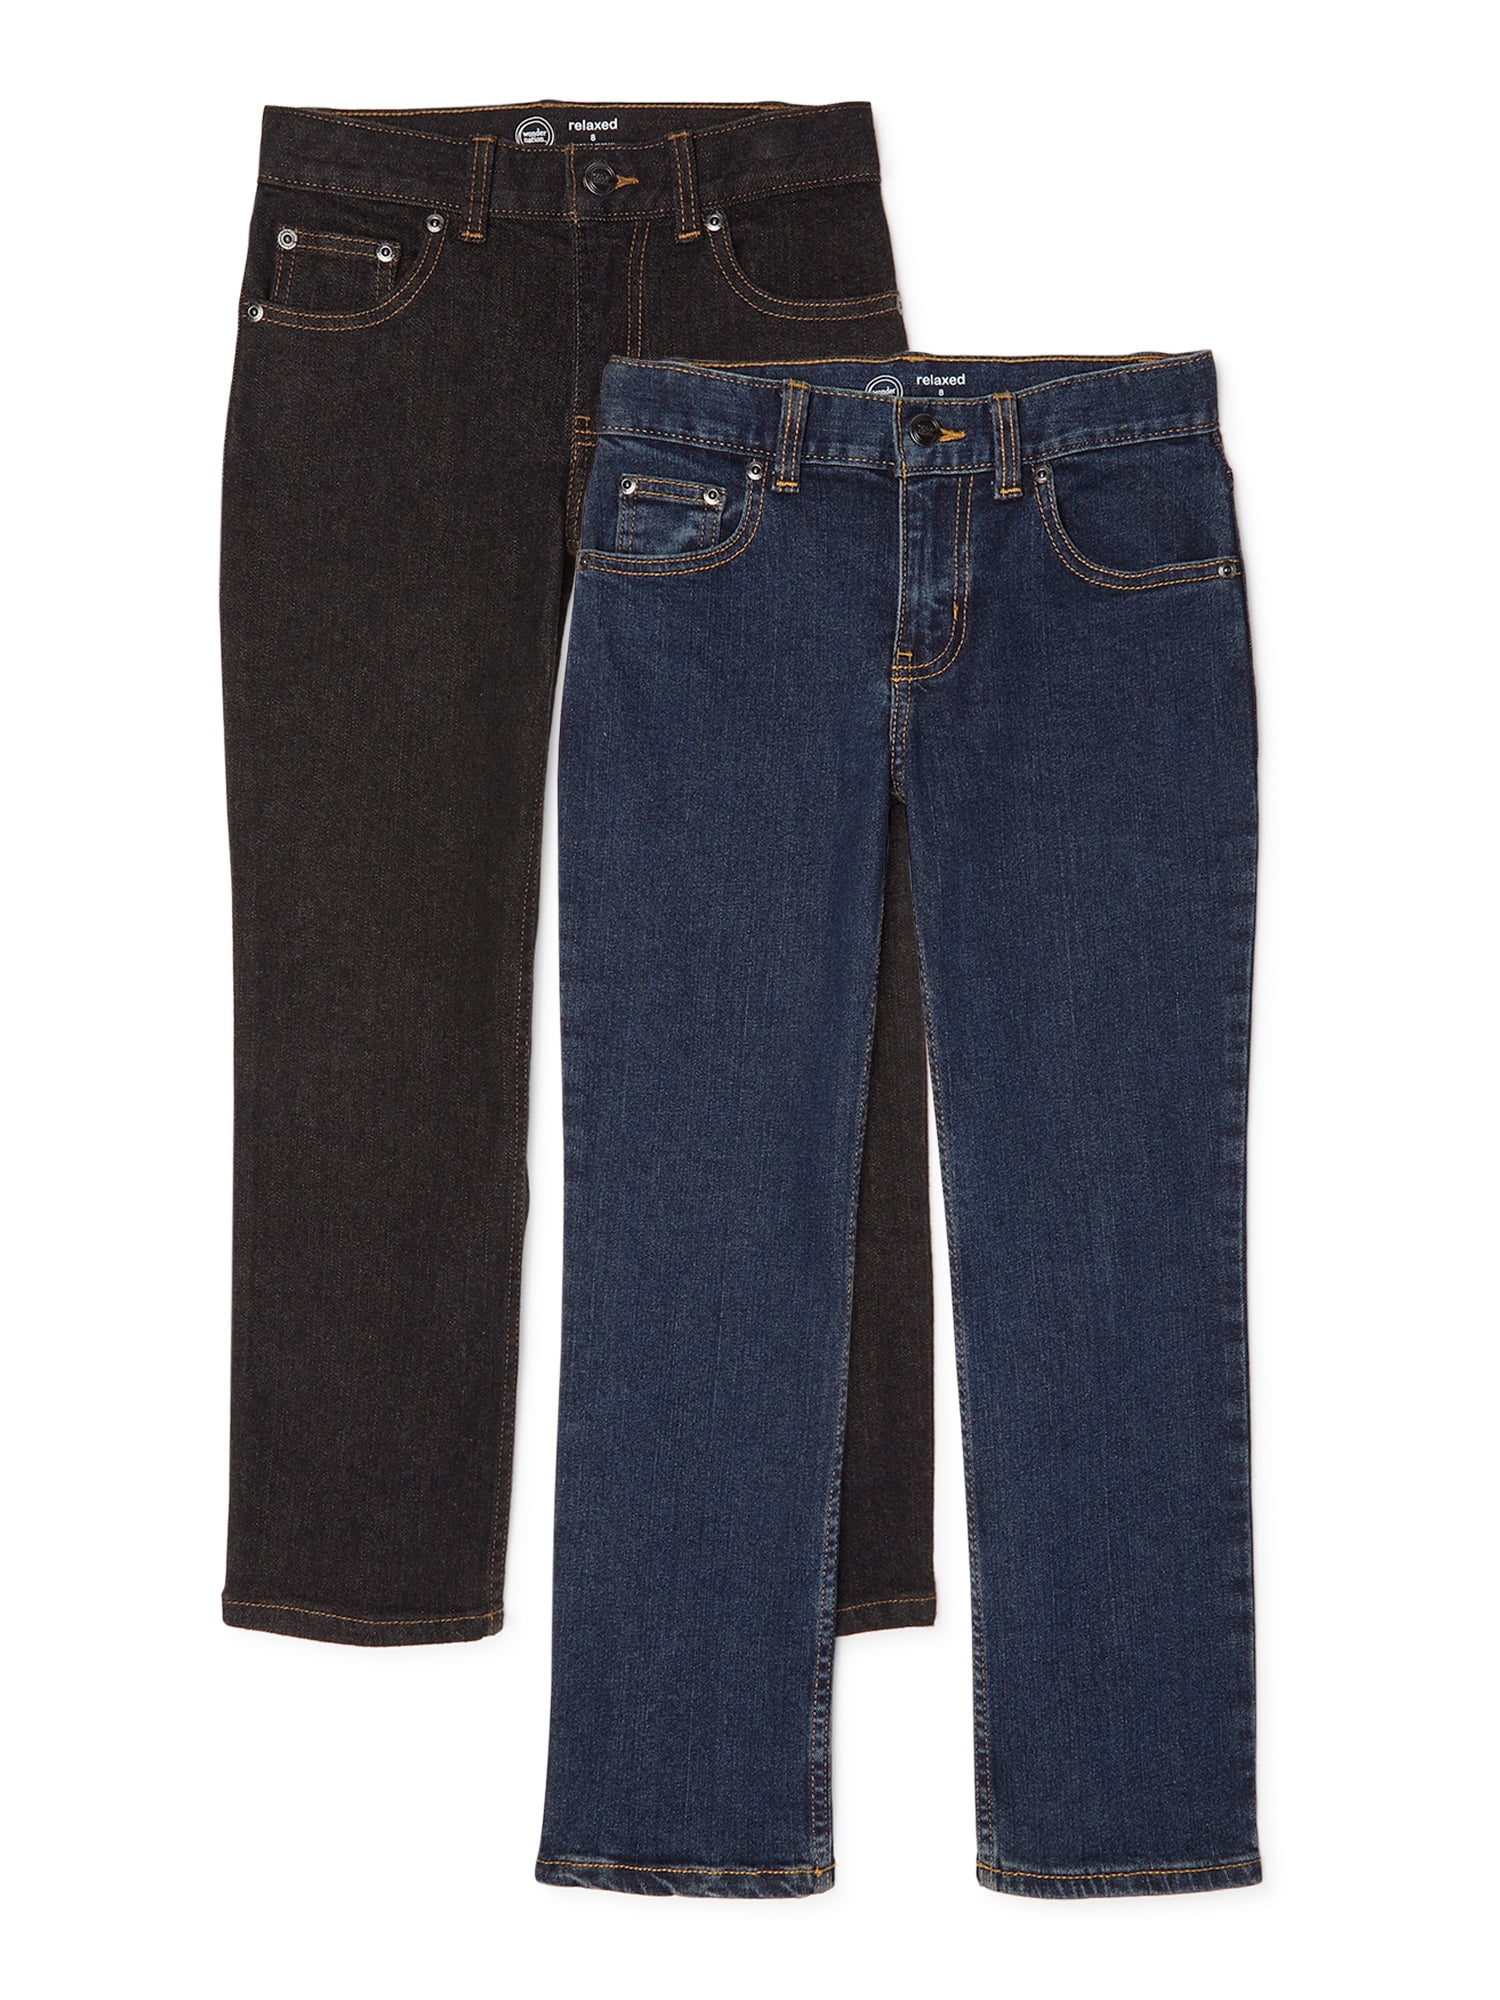 route 66 men's big & tall relaxed jeans